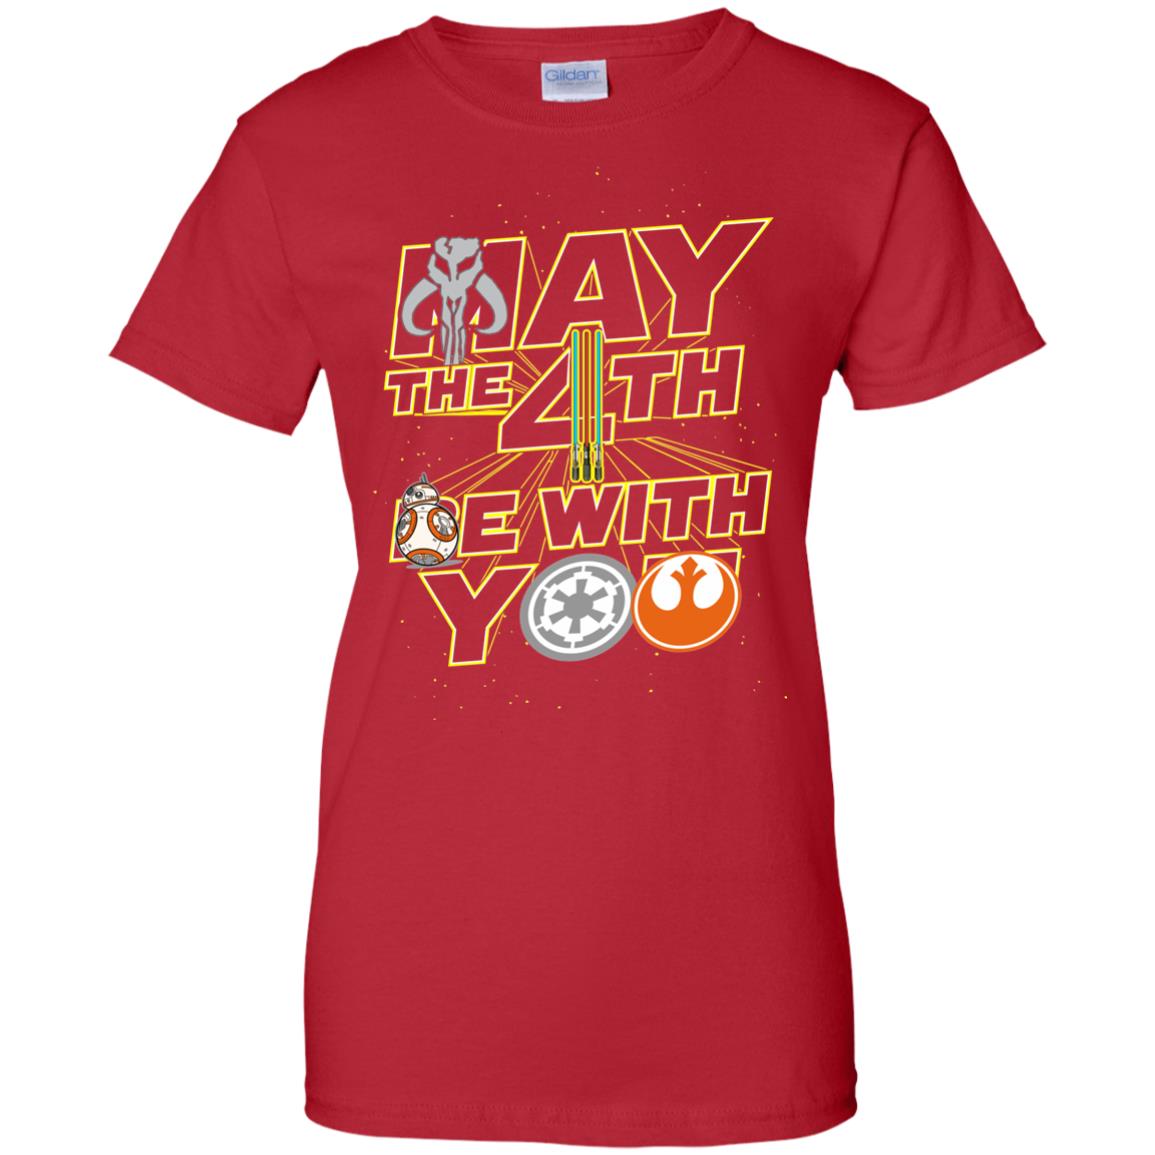 Ladies' May the 4th Be 100% Cotton Graphic Tee